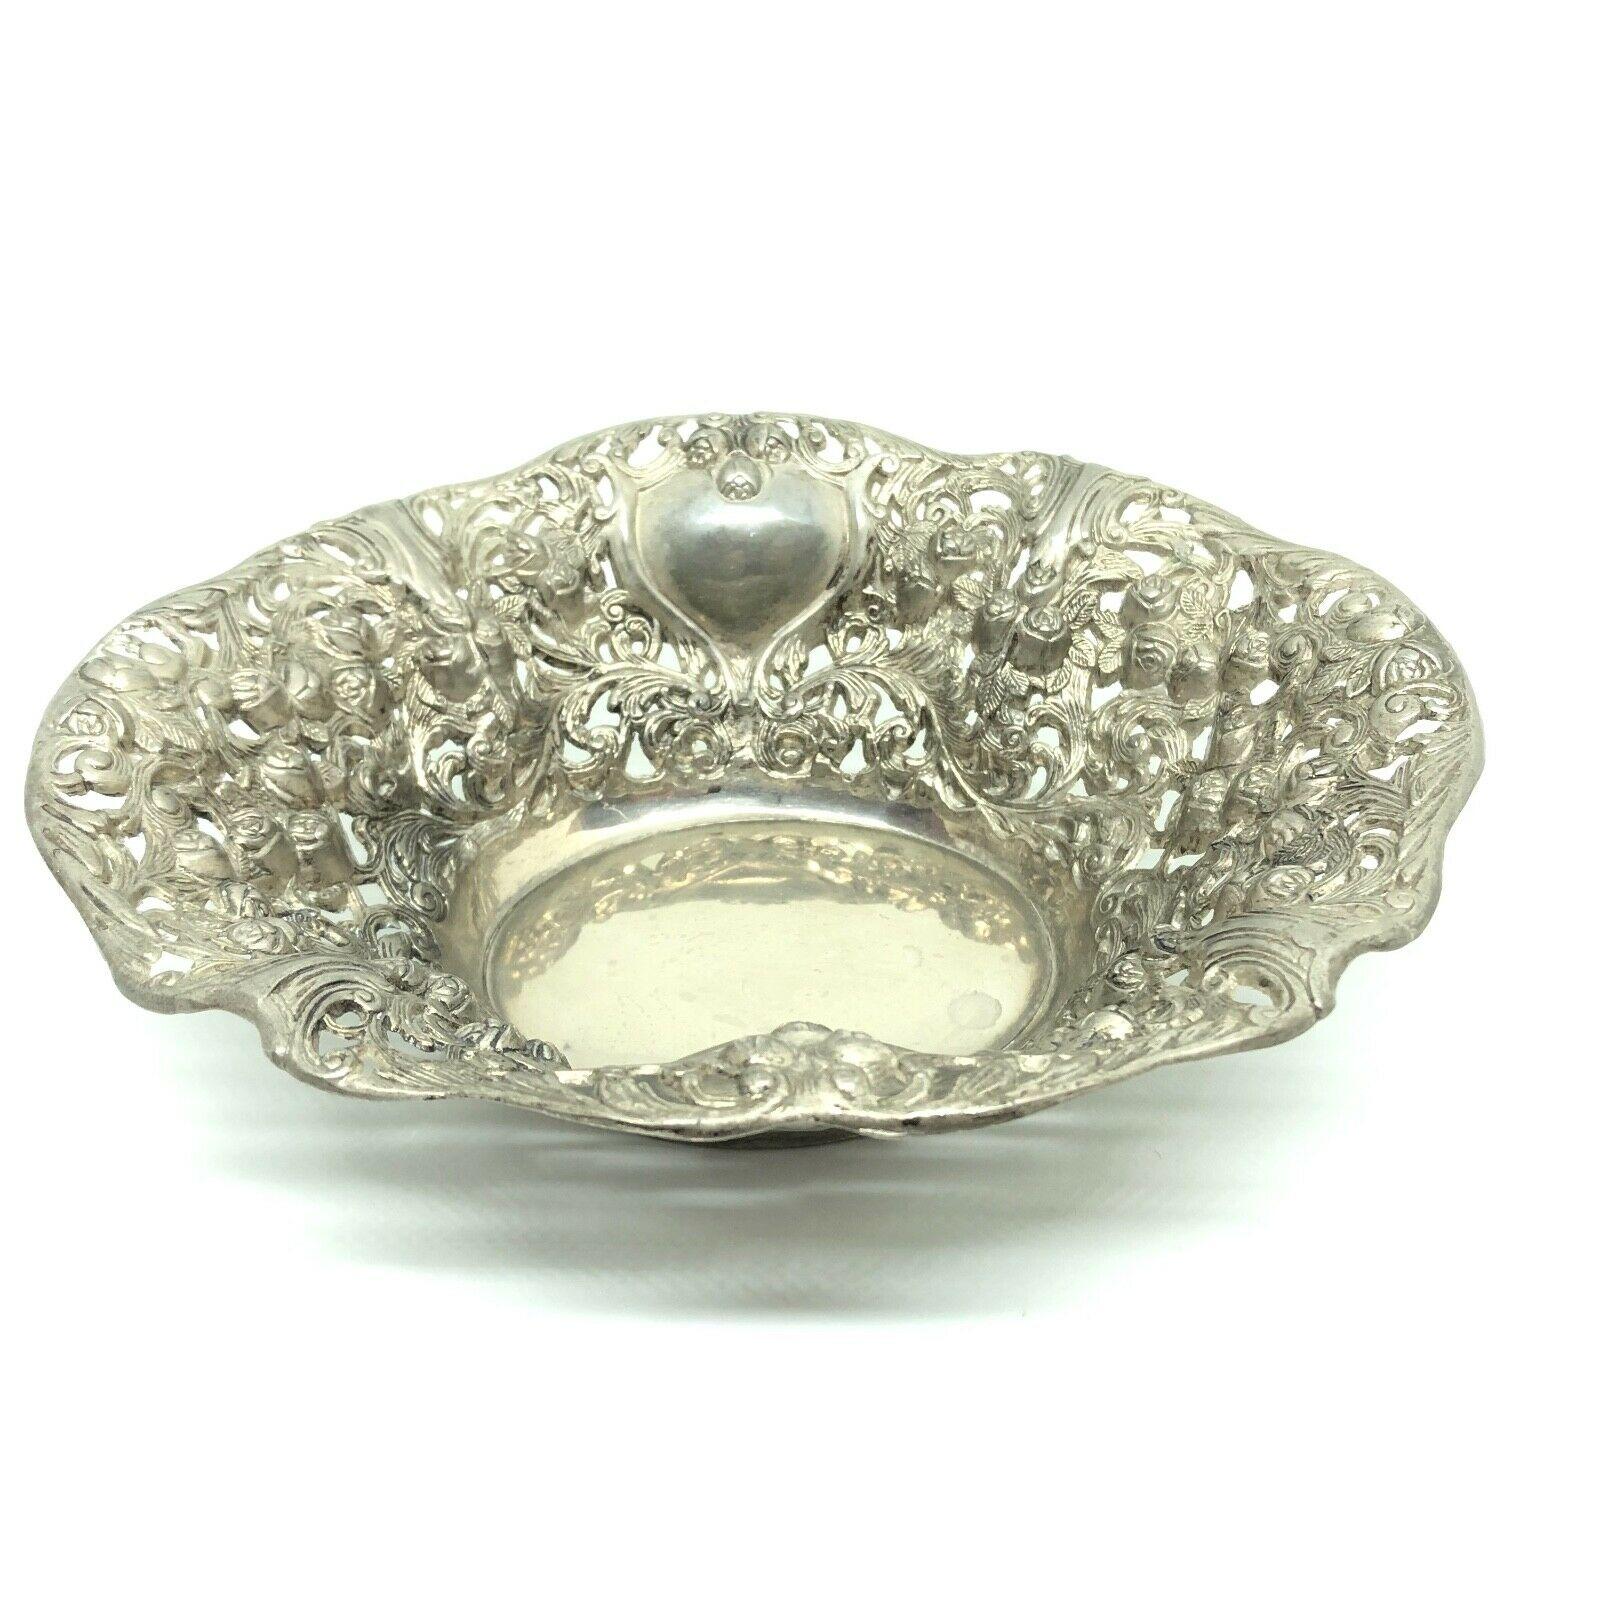 A beautiful tea cookies or small fruit bowl basket. It is in a nice 'Rose and Leaf' design. Made of silver plated metal, it will make a nice addition to any table.
  